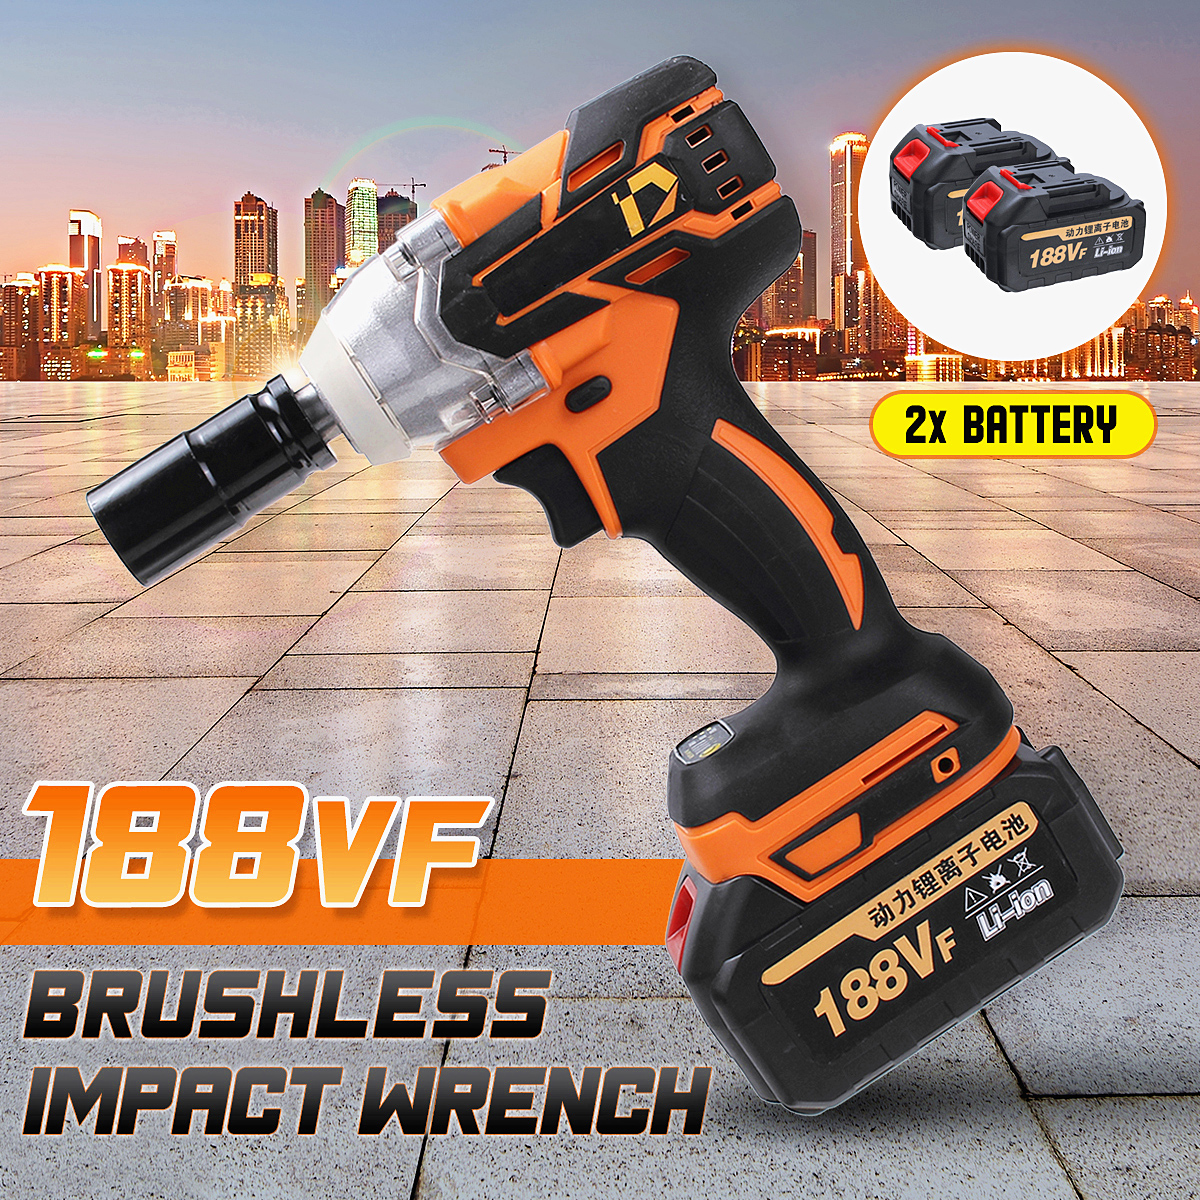 188VF-380Nm-12quot-Brushless-Cordless-Electric-Impact-Wrench-15000mAH-2x-Battery-1573435-1